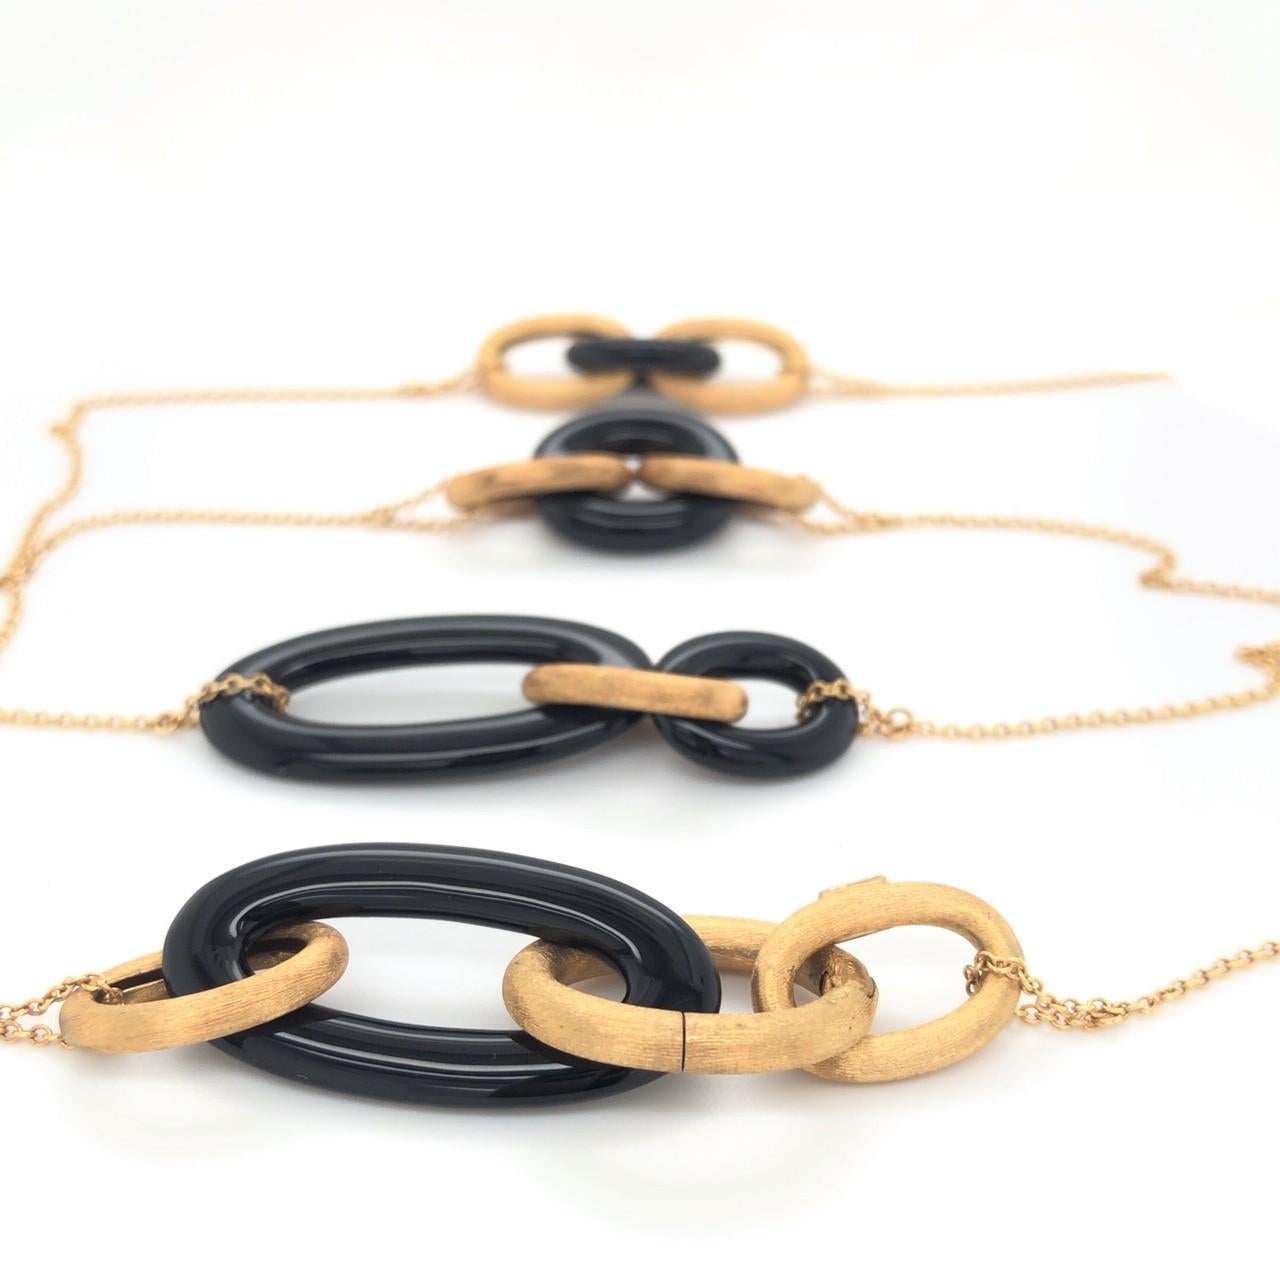 Nanis Olga 18 Karat Yellow Gold and Onyx Contemporary Necklace In Excellent Condition For Sale In La Jolla, CA